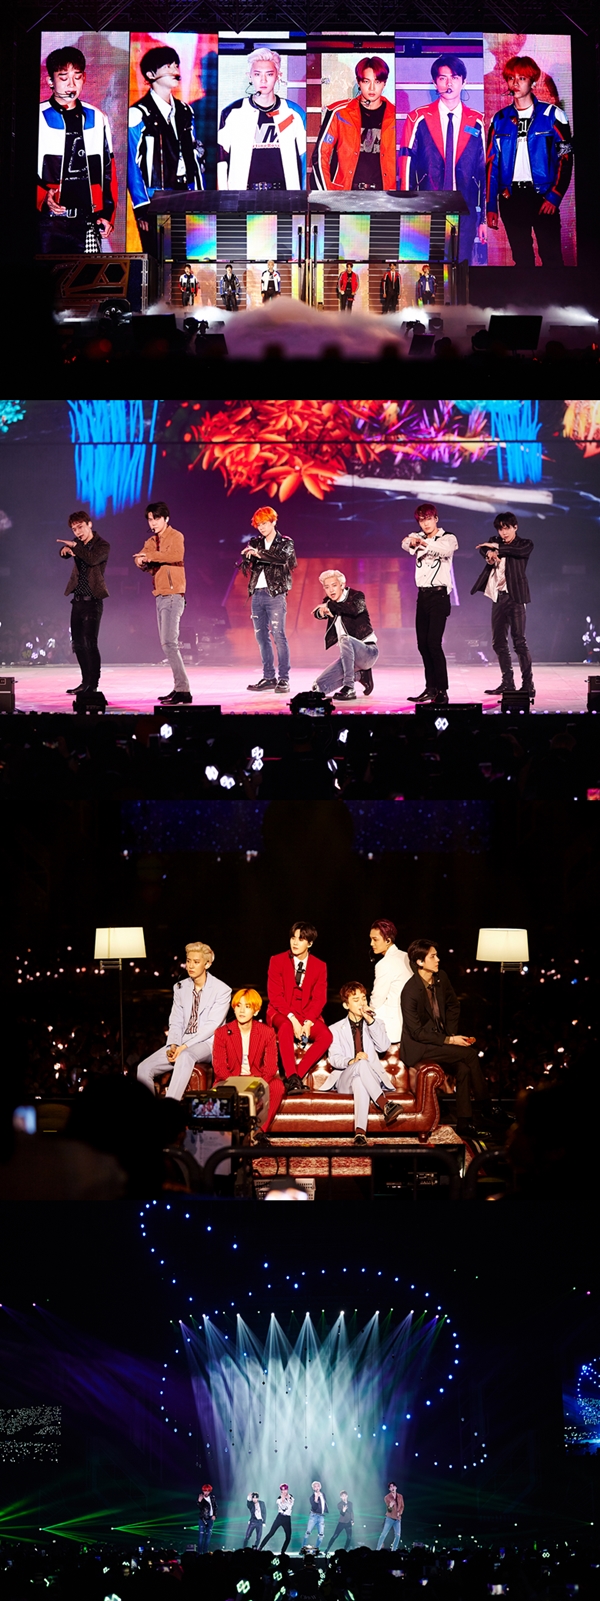 The group EXO completed the fifth performance of the official record.The fifth solo concert EXO Planet #5 - Exploration - (EXO PLANET #5 - EXploration -) of EXO (Suho, Chanyeol, Kai, Dio, Baekhyun, Sehun, Siumin, Chen, and Ray) was held at Olympic Park Gymnastics Stadium in Songpa-gu, Seoul on the 21st.The concert was based on the concept of exploration to leave with EXO. EXO racing at first.Everyone is racing to a hobby, and is attracted to some unknown silver light and goes to another planet.So EXO is exploring other planets, and EXOel (fandom) is together. EXO continued its exploration with EXOel on a colorful stage.The hit songs such as Growl, Overdose, Call Me Baby, Monster, Power, Tempo, Love Shot are the stage of EXOs sword dance and EXOs high-decibel taichangi The mix of the two produced a spectacular performance.In addition, the list includes a large number of regular fifth albums, including Gravity, Sign, 24/7, Ooh La La, Oasis, Bad Dream, Damage, and so on, and new stages that can only be seen in Concert. Rutts in place.Here, EXOs unit and solo stage focused on the charm of each member.First, Baekhyun, who recently released his first solo album, sang UN Village and added sticky choreography that was not before, leading to EXOels shout.Suho, who set up a solo stage with Been Through, a song from the 2017 winter special album, took off his dreamy choreography and released his abs, which clearly revealed the six packs, and received the fans Kim Jun-myeon (real name).Continuing to show off her singing skills with Lights Out, Chen erupted an extraordinary sensibility.EXOs first duo, Sehun & Chanyeol, who is on the 22nd, released the stage for the first time: What a life and You can call it. Will you sit down?The two people who raised the fans sprinkled water on the audience and grabbed the hands of the fans and completed the stage of the youthful yet hip stage.Kai, who finished his sweaty fashion by wearing a vest on his bare body and putting down his pants, showed off his sexy with his unique choreography.EXOs fan service was also outstanding, and the stage structure that connected the main stage, the central stage, and the sub stage together helped EXO get closer to the fans.In particular, EXO took a self-portrait with fans cell phone cameras and interacted with EXOEL, who also responded with a slogan and a TACCHANG event.The members gathered 90,000 viewers with six performances, and EXO showed a sense of ending to the fans who loved them.Chanyeol said, Any philosopher said that human beings die, but I read that humans are born to start, not to die.I was just an ordinary student and was reborn as an EXO, and from that point on, I think it is the beginning of EXO Chanyeol, not Park.I have been with you at the beginning, and I think it is fun to be able to live with you to be happy, not to live to die that fate. With EXOel, we are one, even if we are far away. I hope EXO and EXOel are partners for the rest of their lives.Ill go to Silver Town and keep seeing it, he said, expressing his affection for his fans.